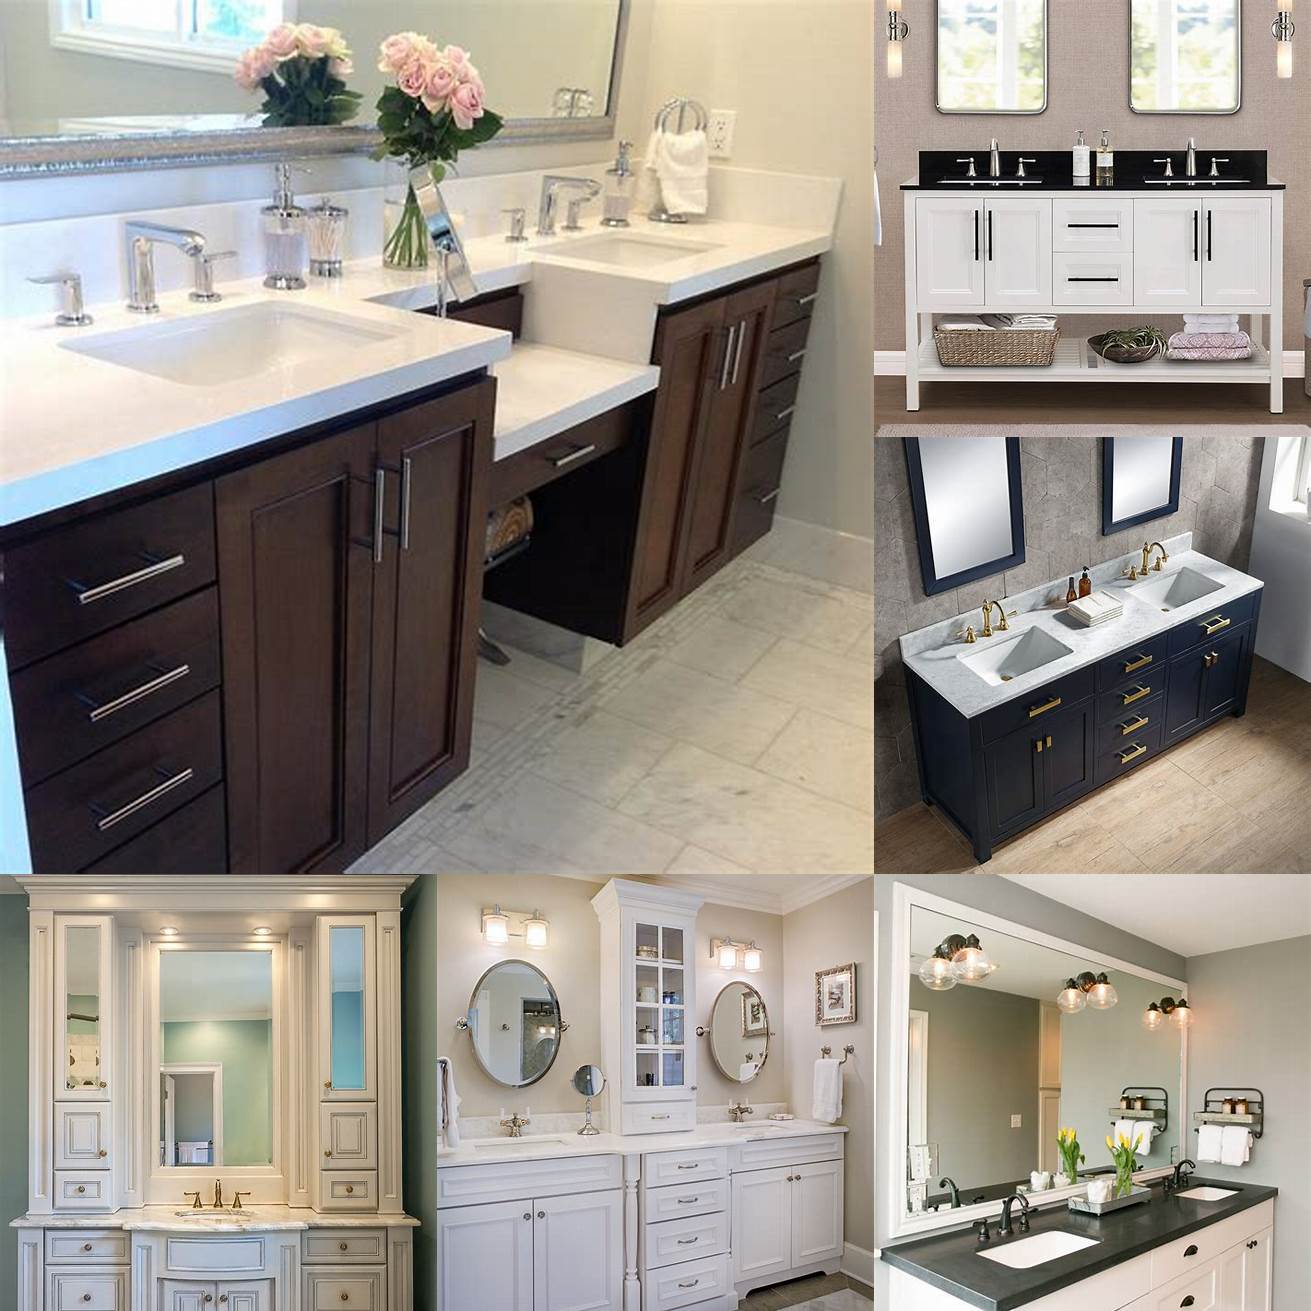 3 This metal vanity adds a touch of luxury to this spacious bathroom with its double sinks and custom hardware